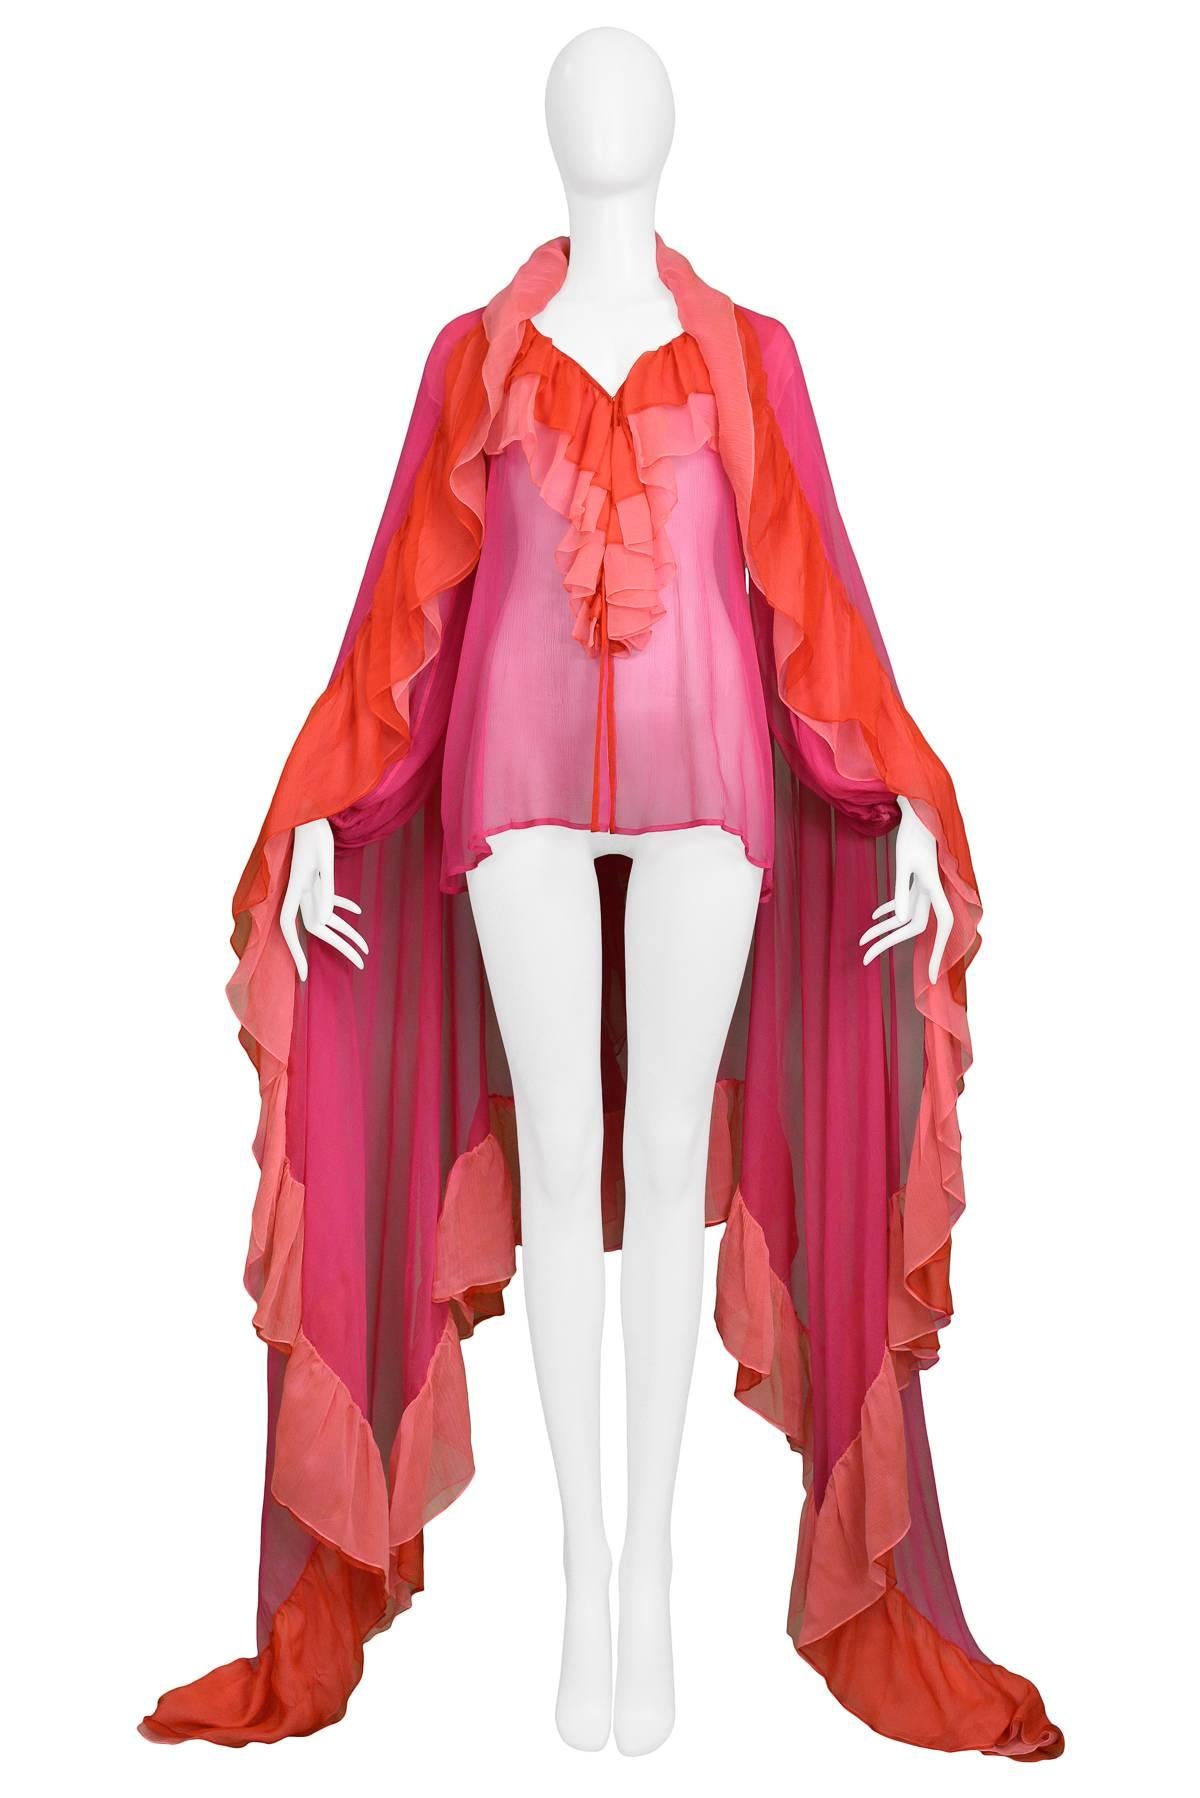 Vintage Yves Saint Laurent  classic silk chiffon peasant blouse featuring a ruffled neckline and matching ruffle shawl comprised of fuchsia, pink and red chiffon. YSL made in France. 